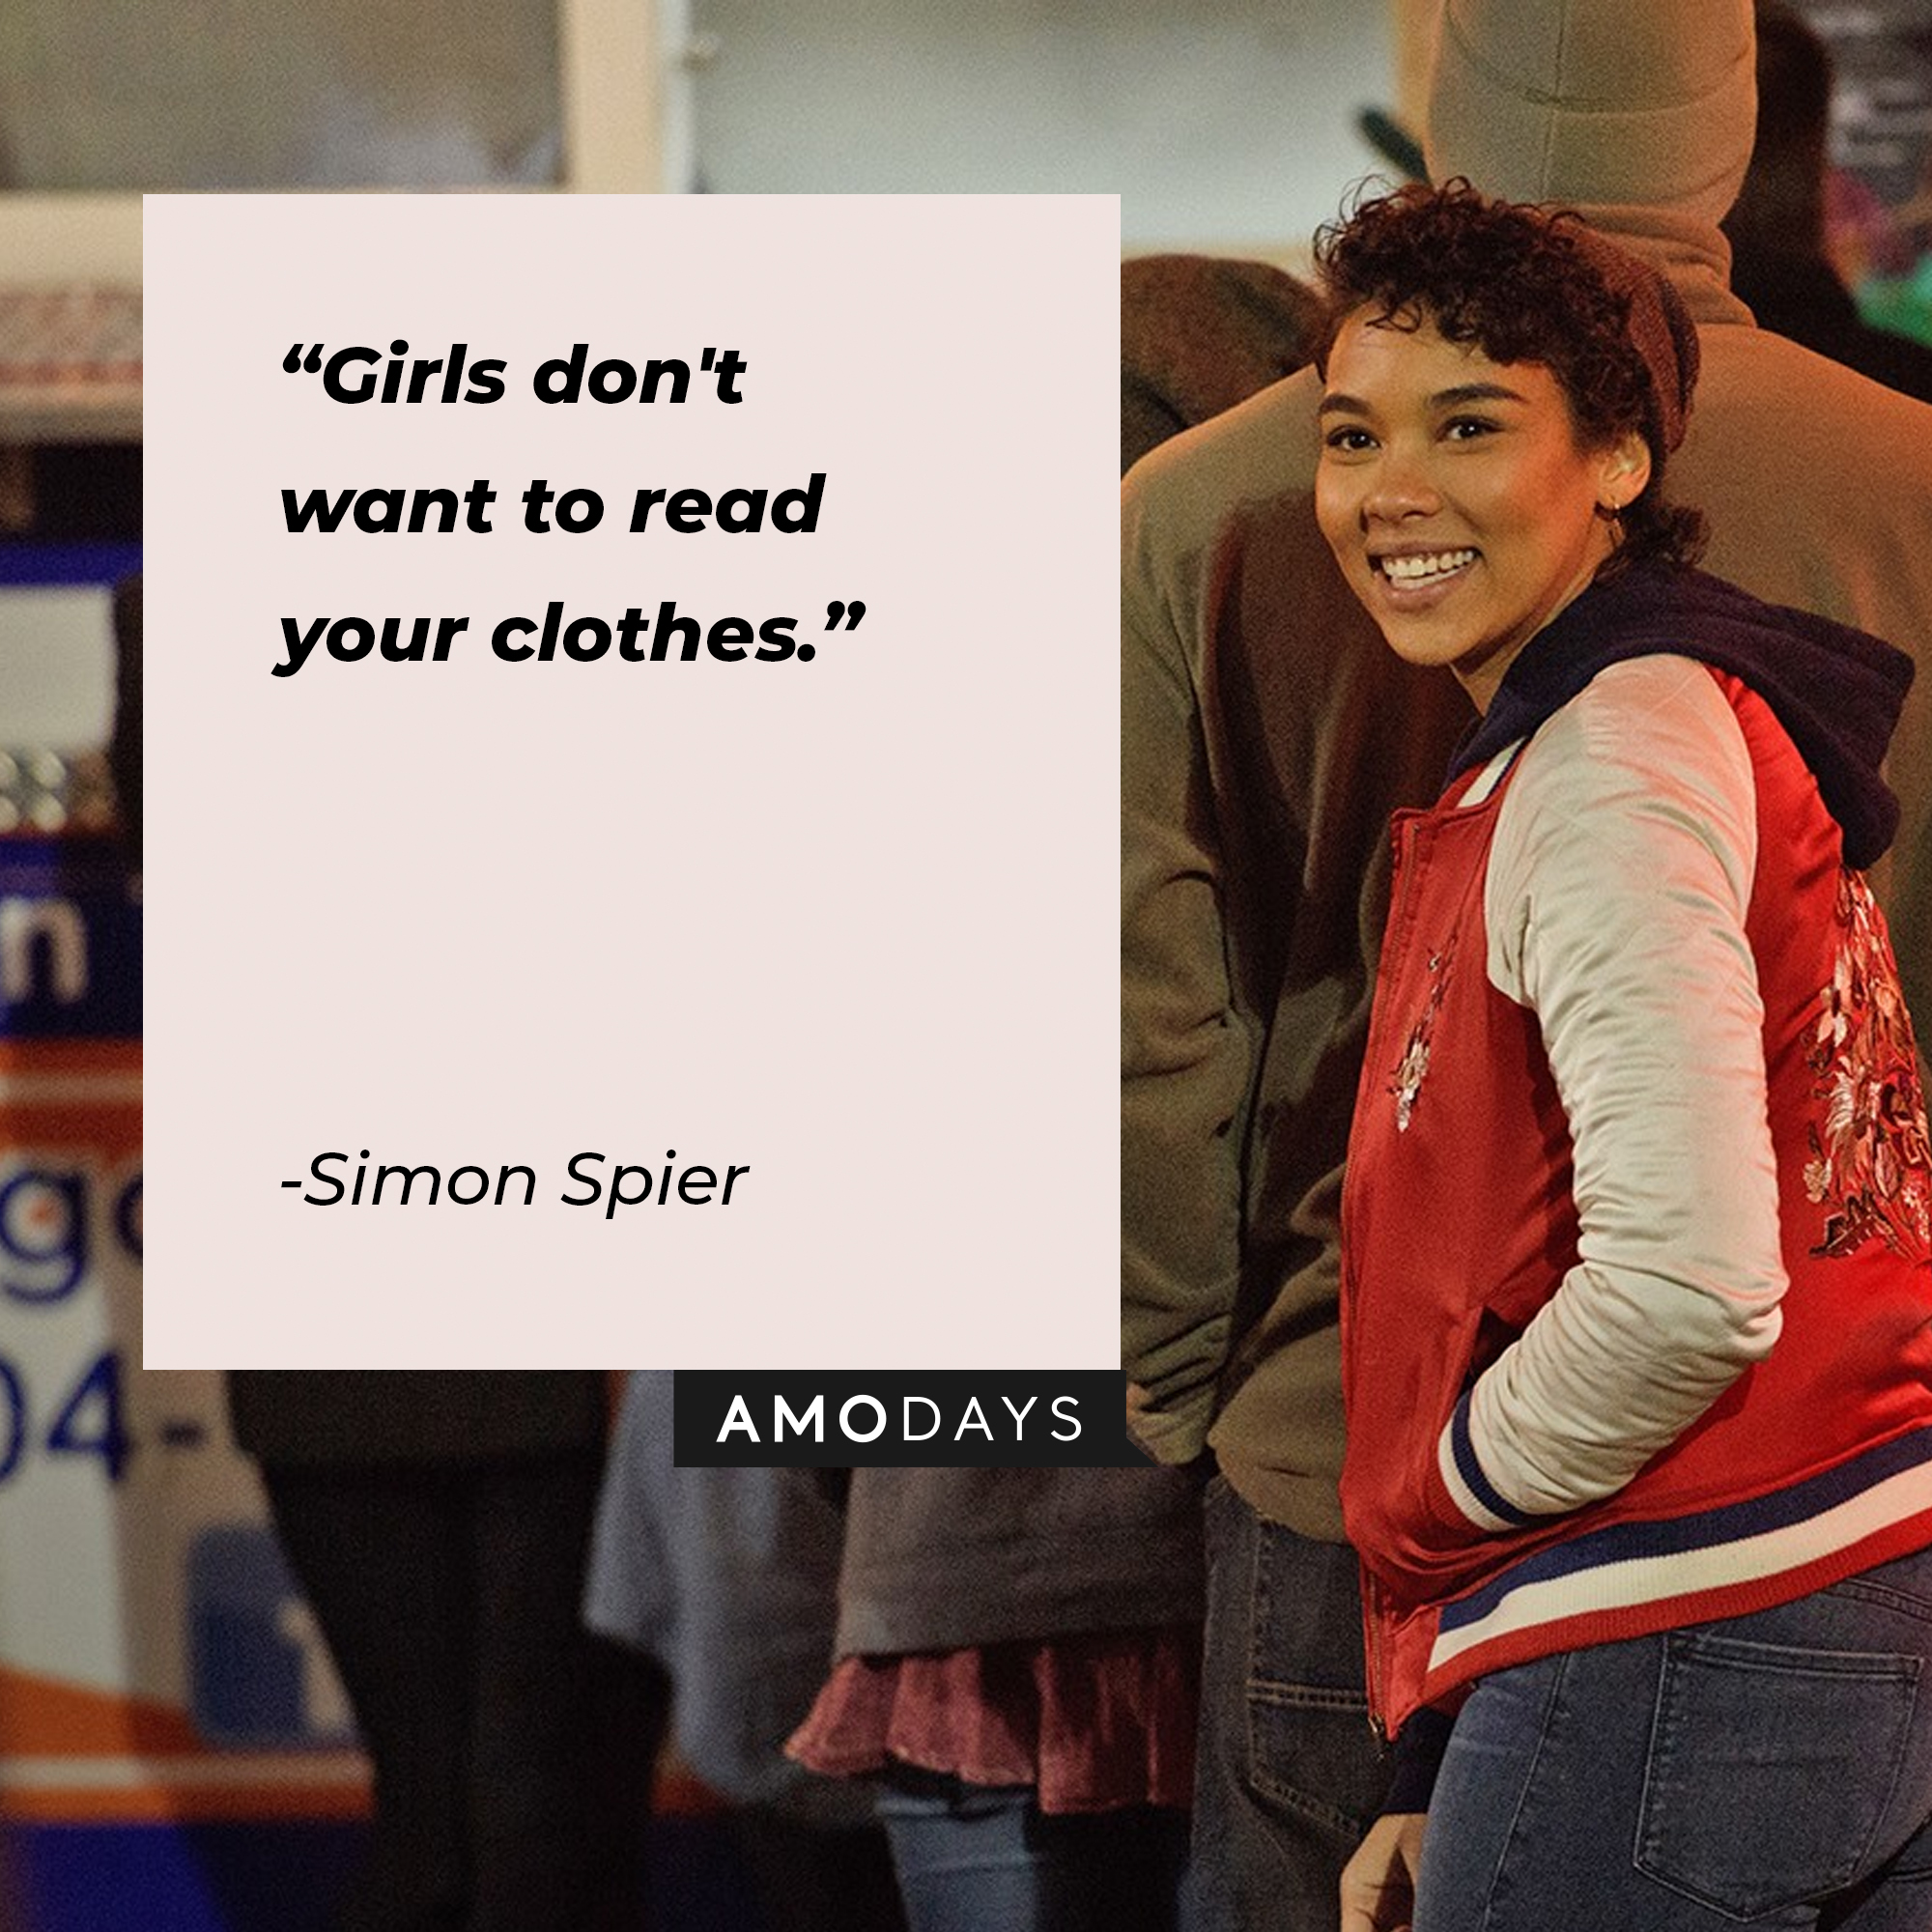 Simon Spier's quote, "Girls don't want to read your clothes." | Image: facebook.com/LoveSimonMovie